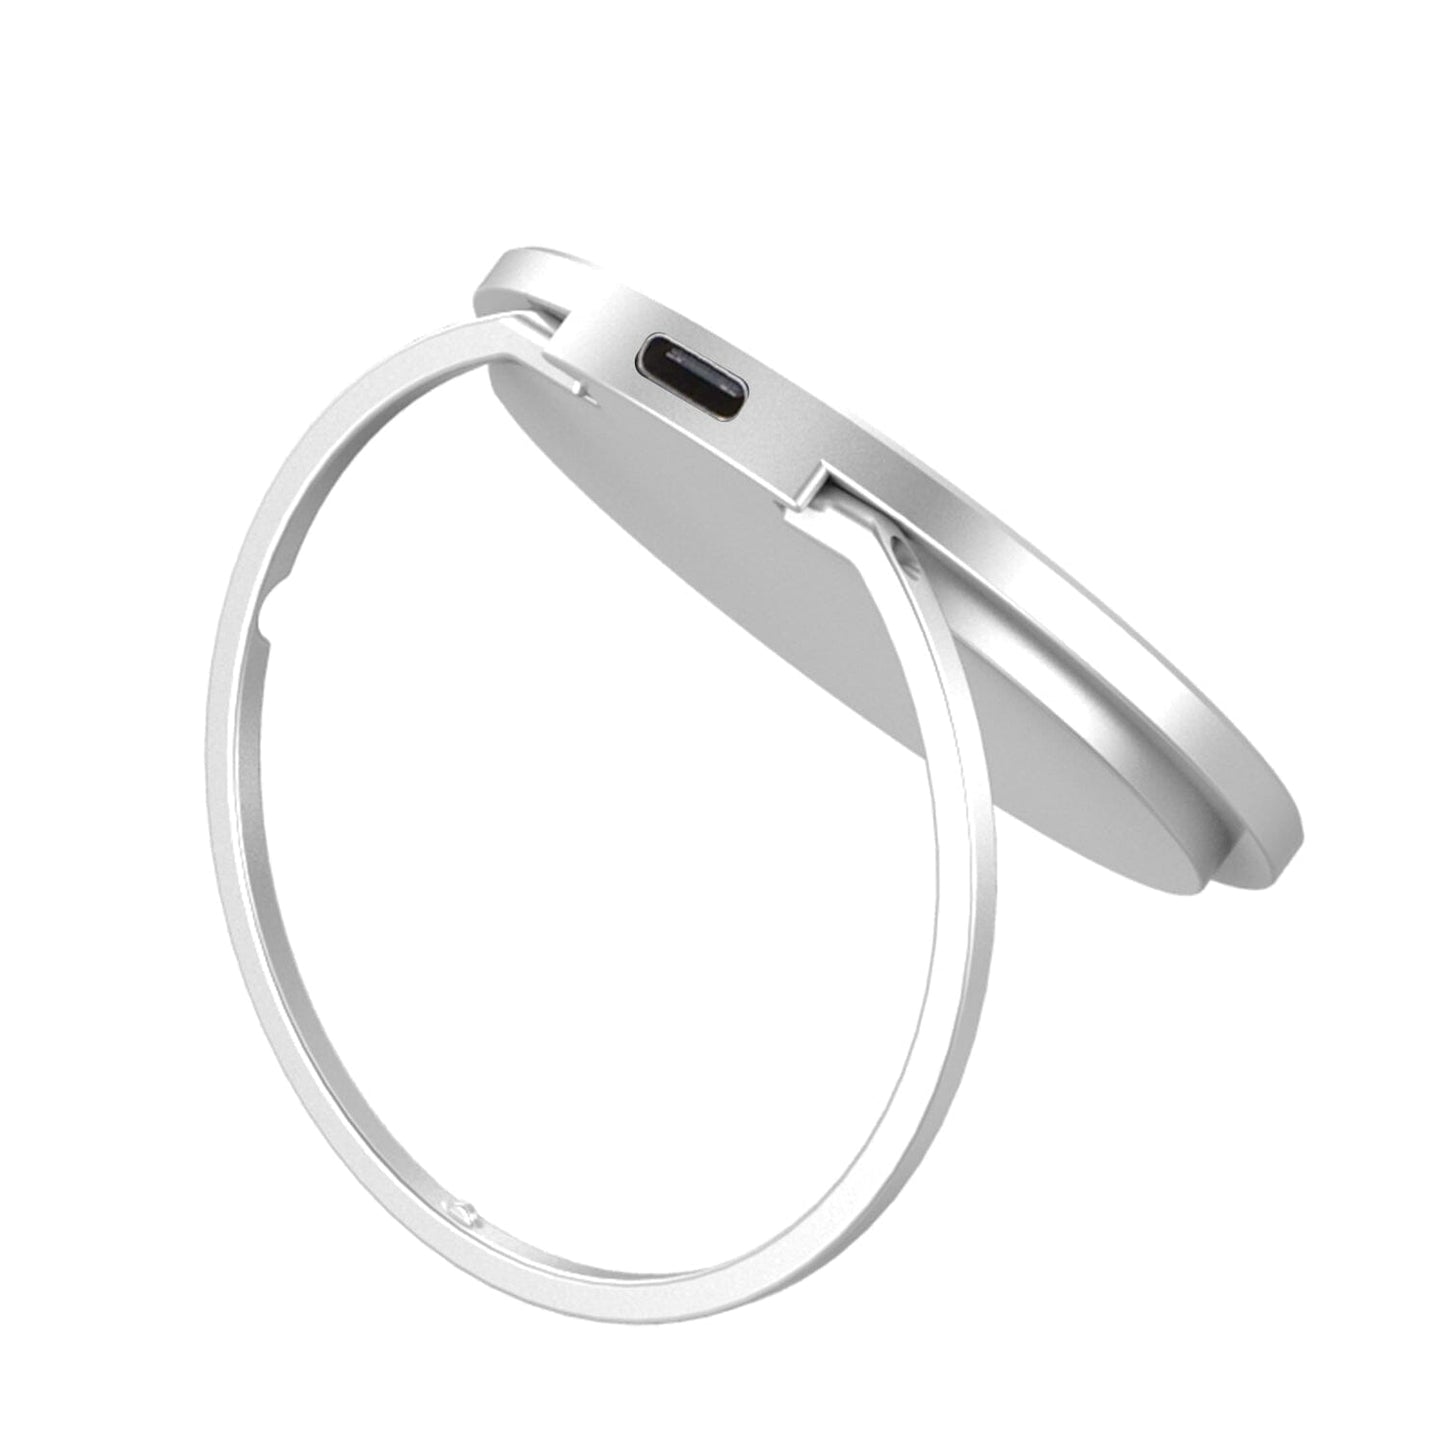 MagSafe Wireless Charger - Cloud Pattern